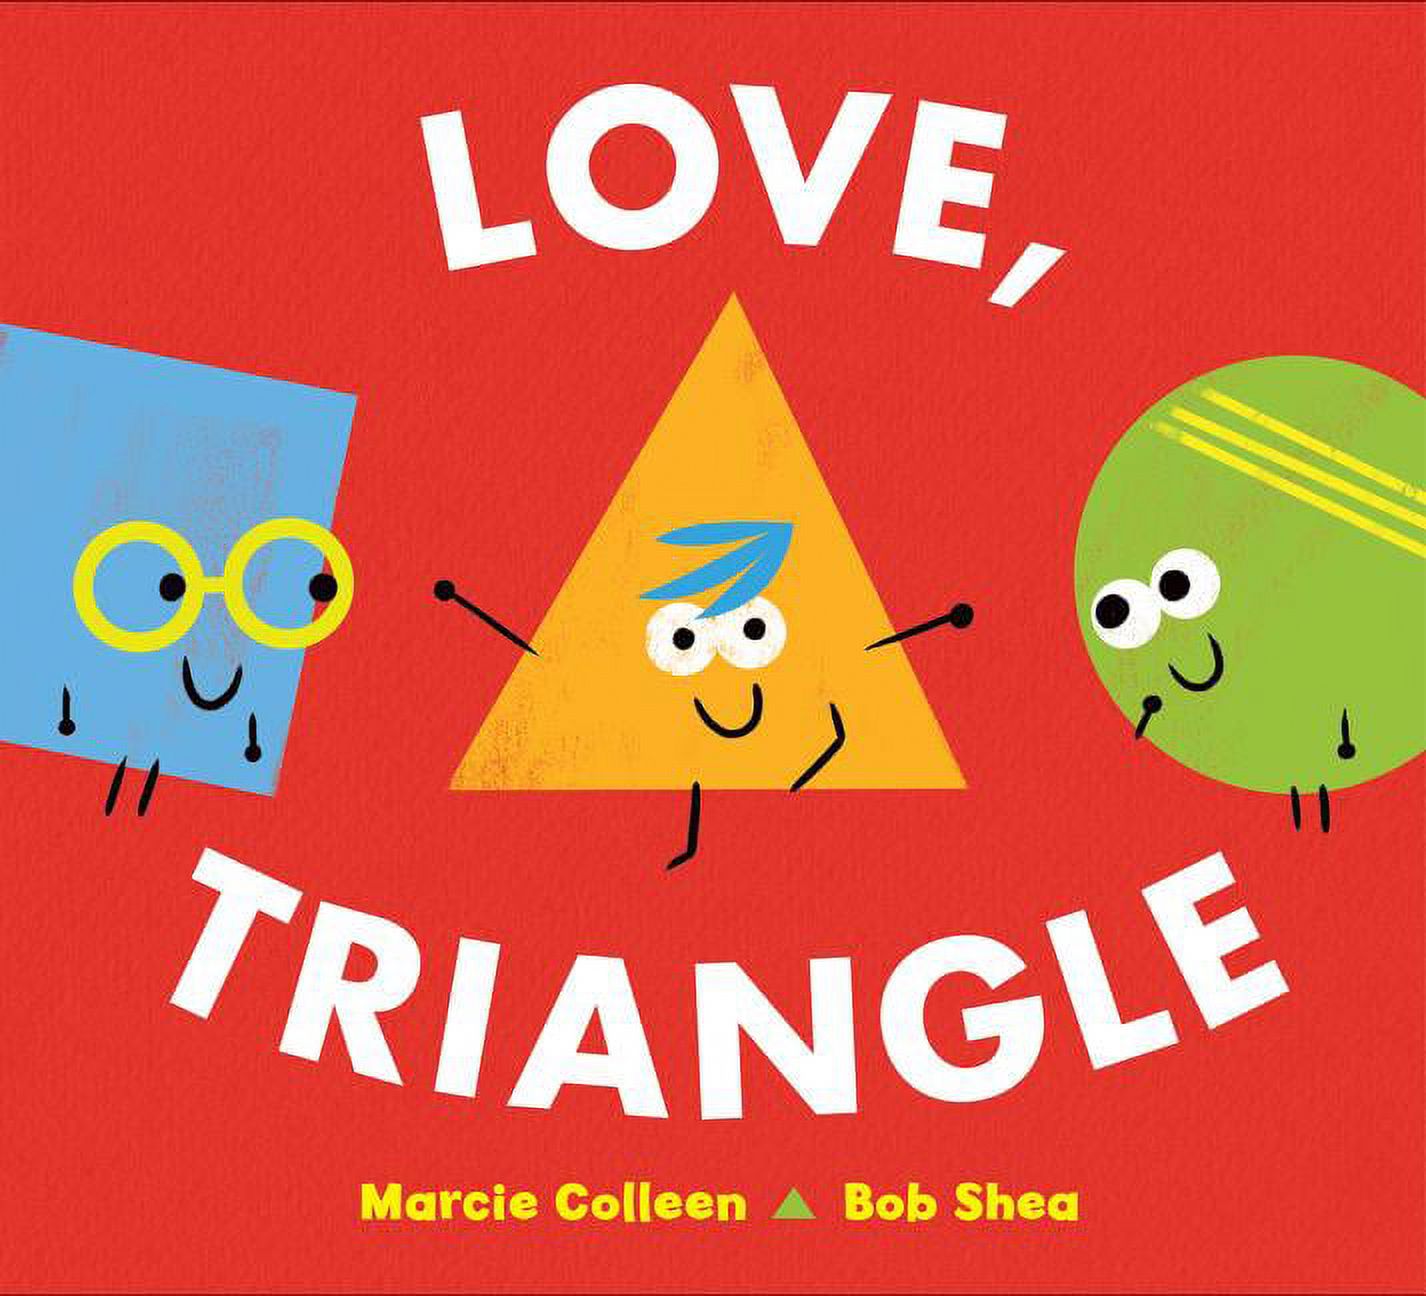 Love, Triangle (Hardcover) - image 1 of 1